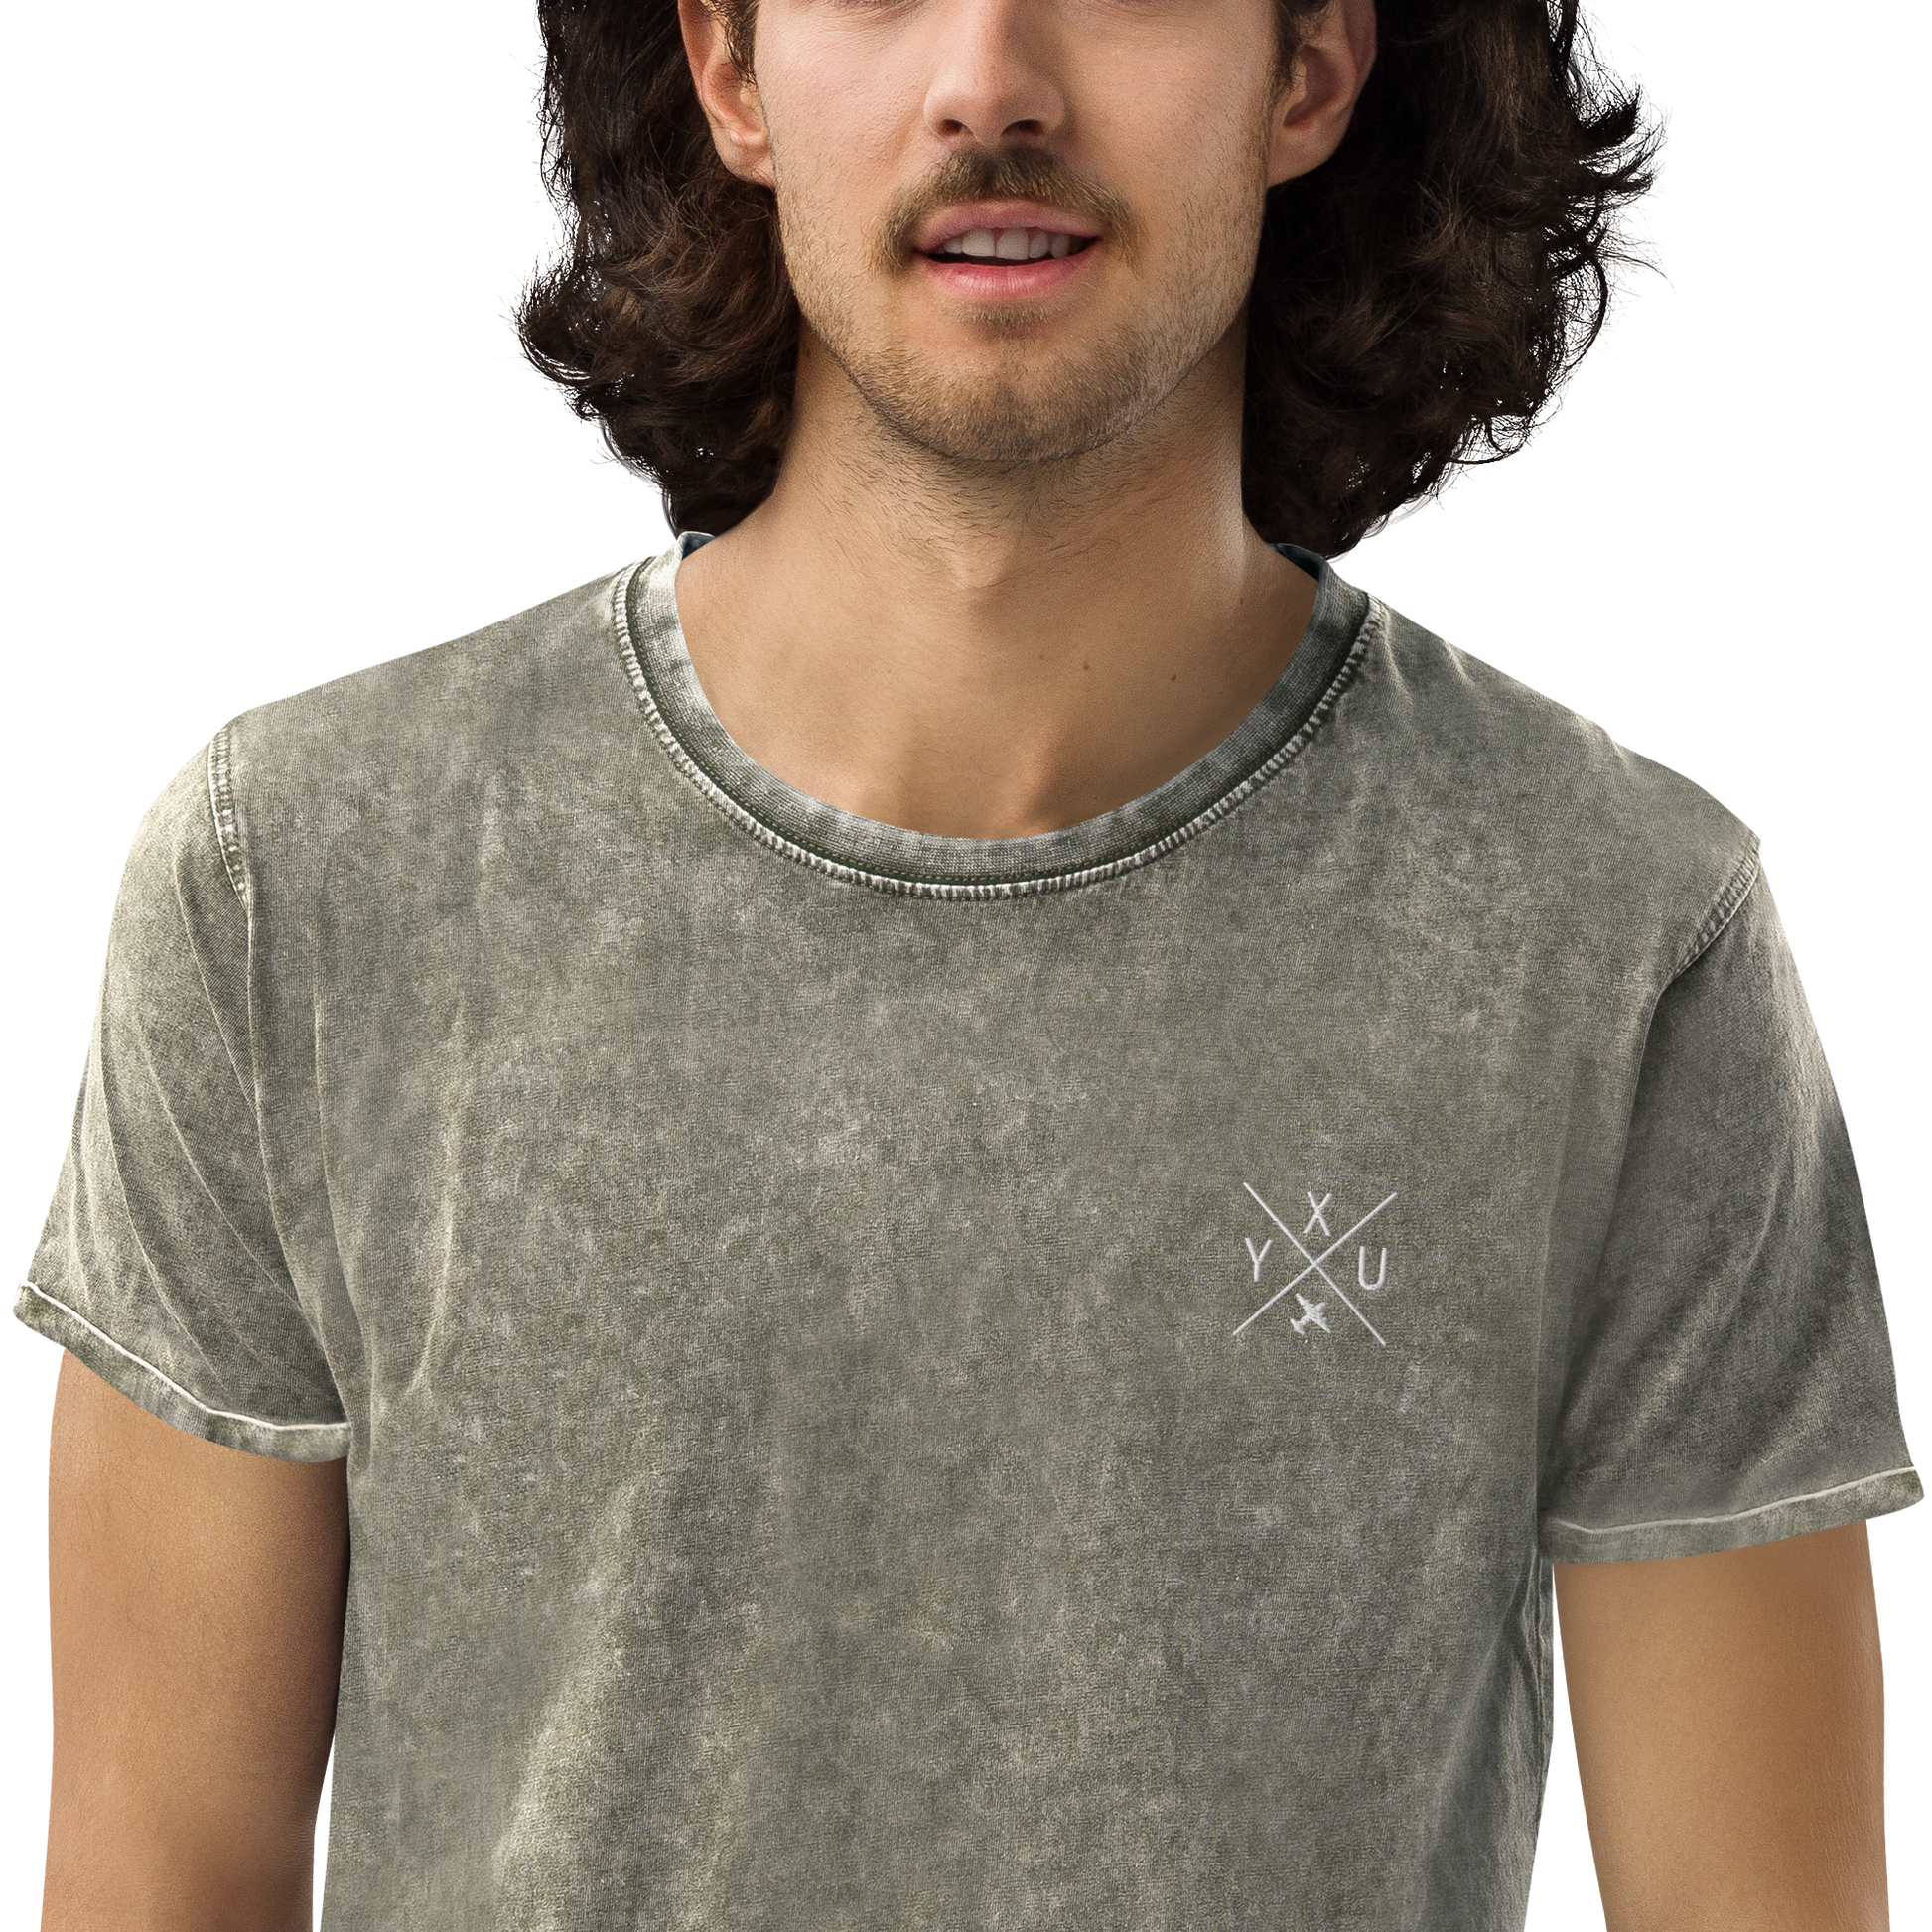 YHM Designs - YXU London Denim T-Shirt - Crossed-X Design with Airport Code and Vintage Propliner - White Embroidery - Image 11